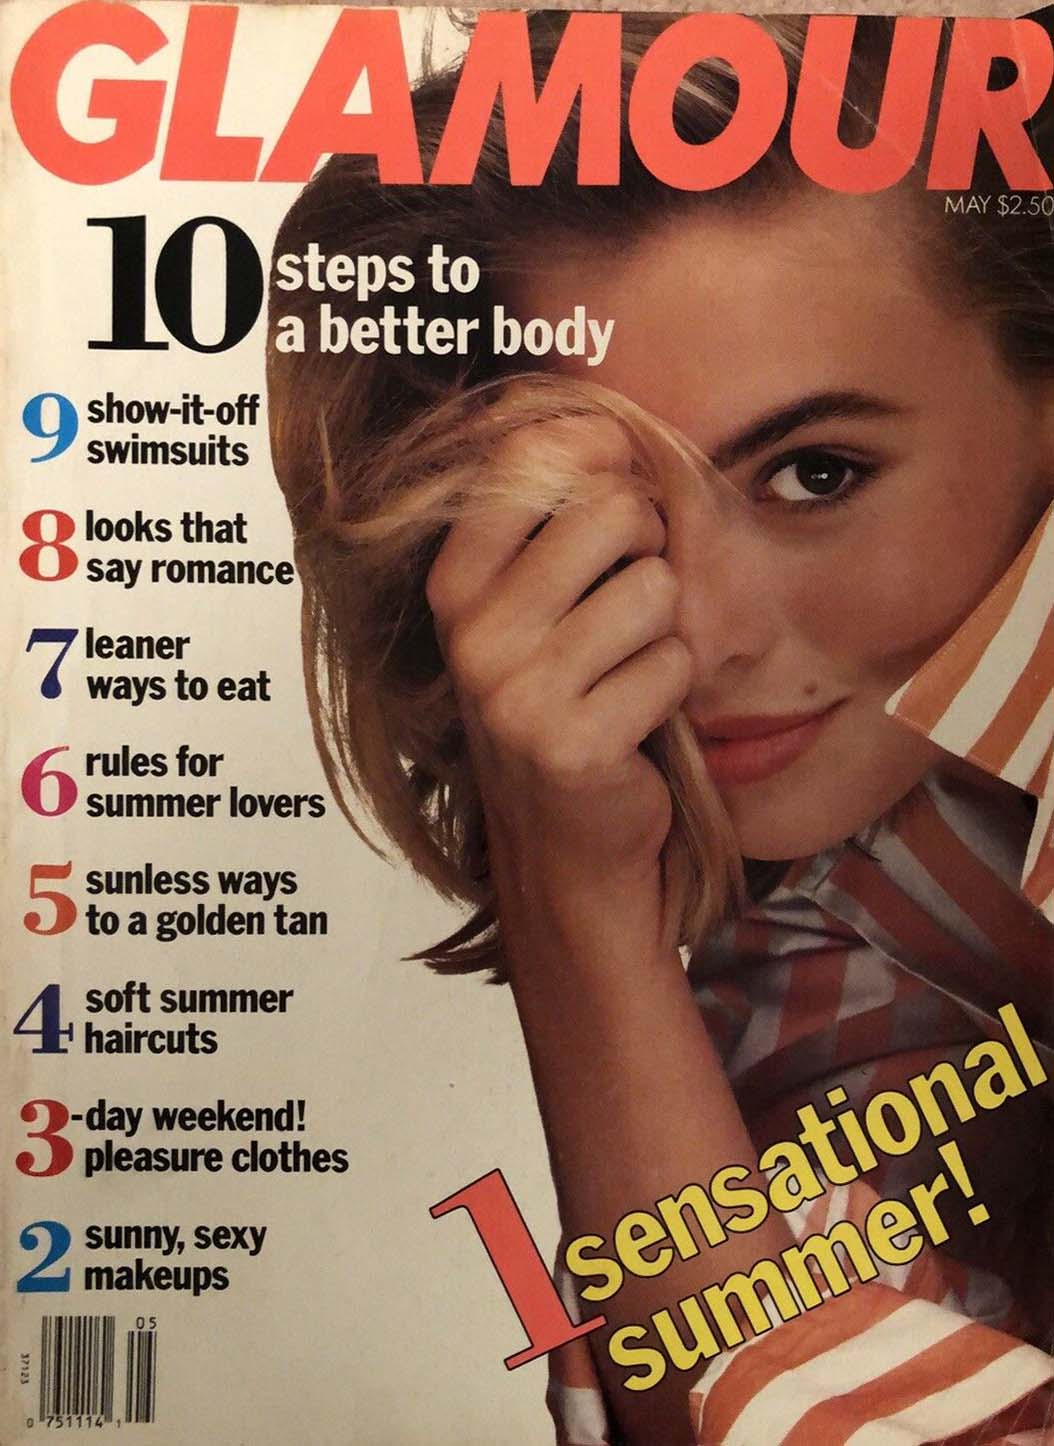 Glamour May 1990 magazine back issue Glamour magizine back copy Glamour May 1990 Womens Magazine Back Issue Published by Conde Nast Publications. 10 Steps To A Better Body.